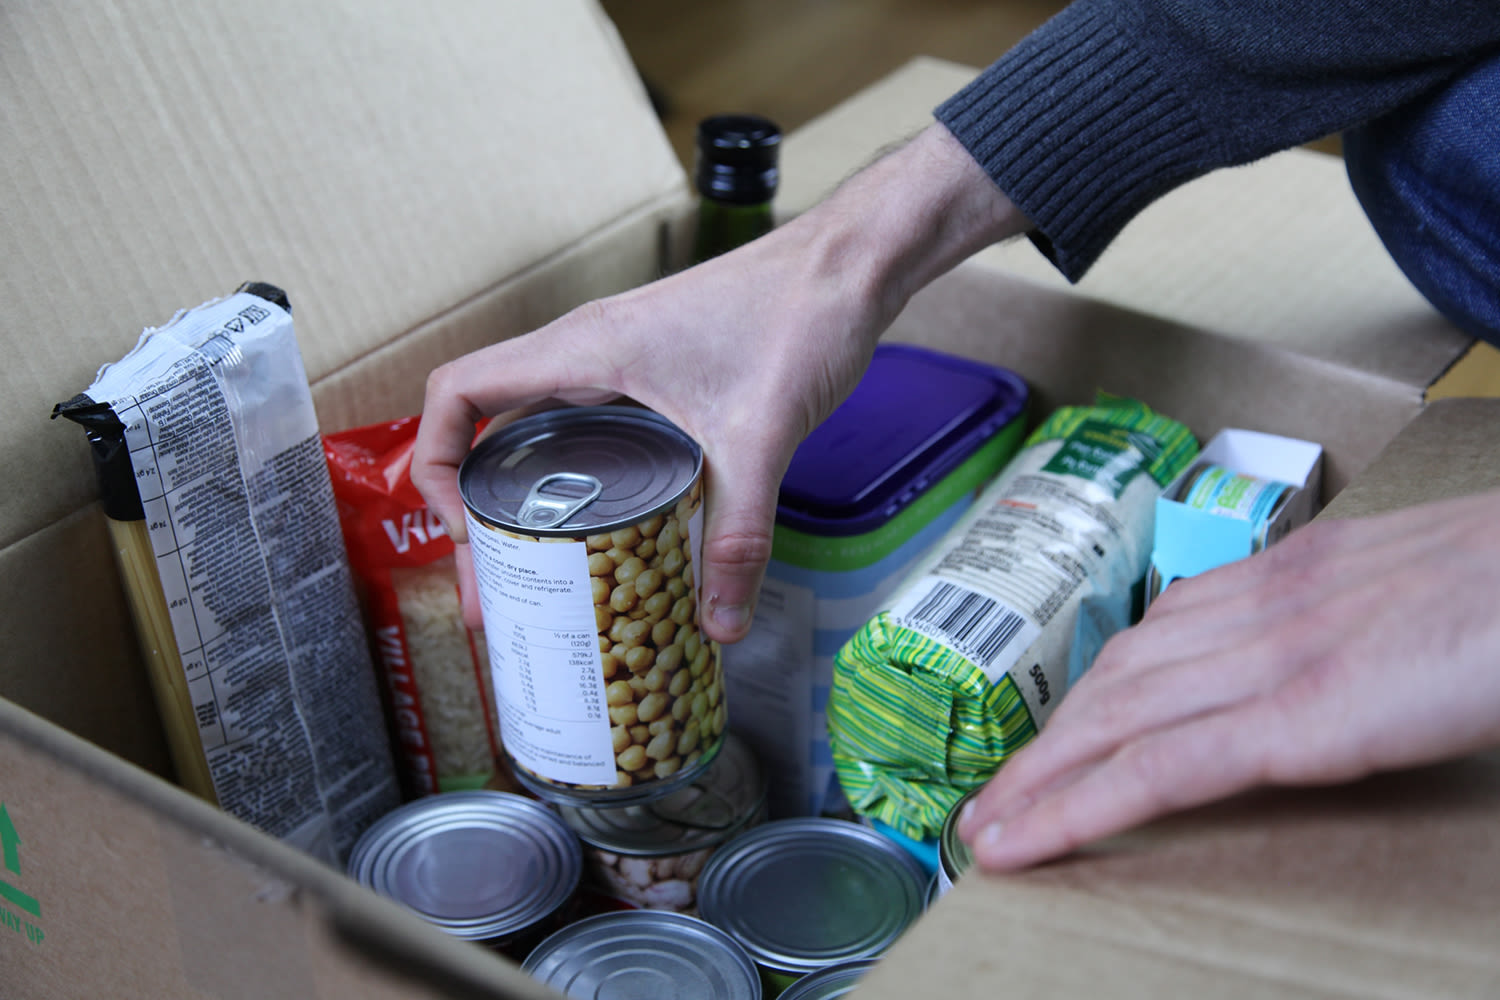 A person reaching into a donated box of food at a food bank